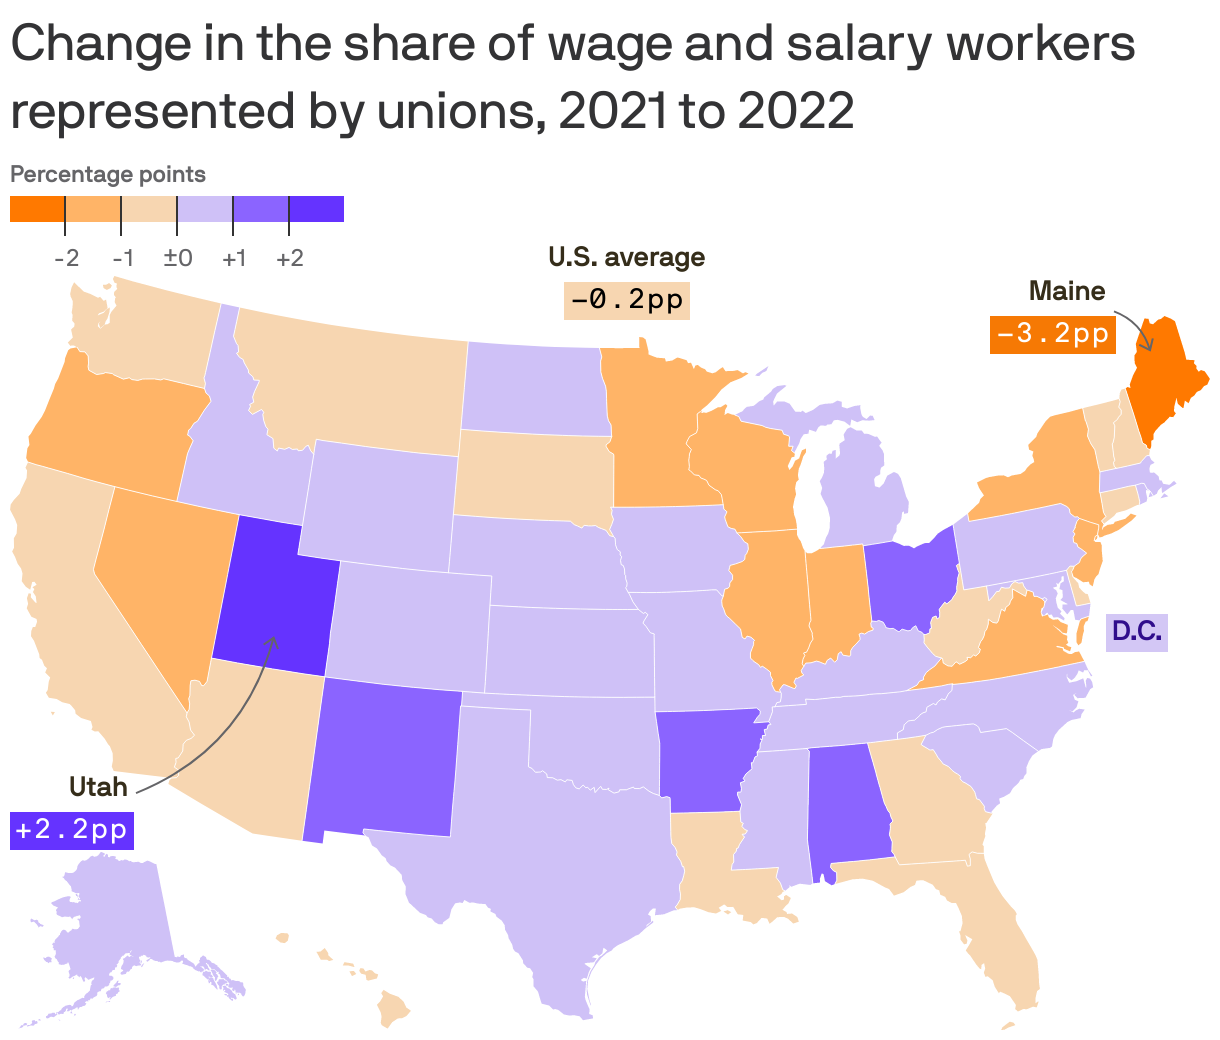 Change in the share of wage and salary workers represented by unions, 2021 to 2022